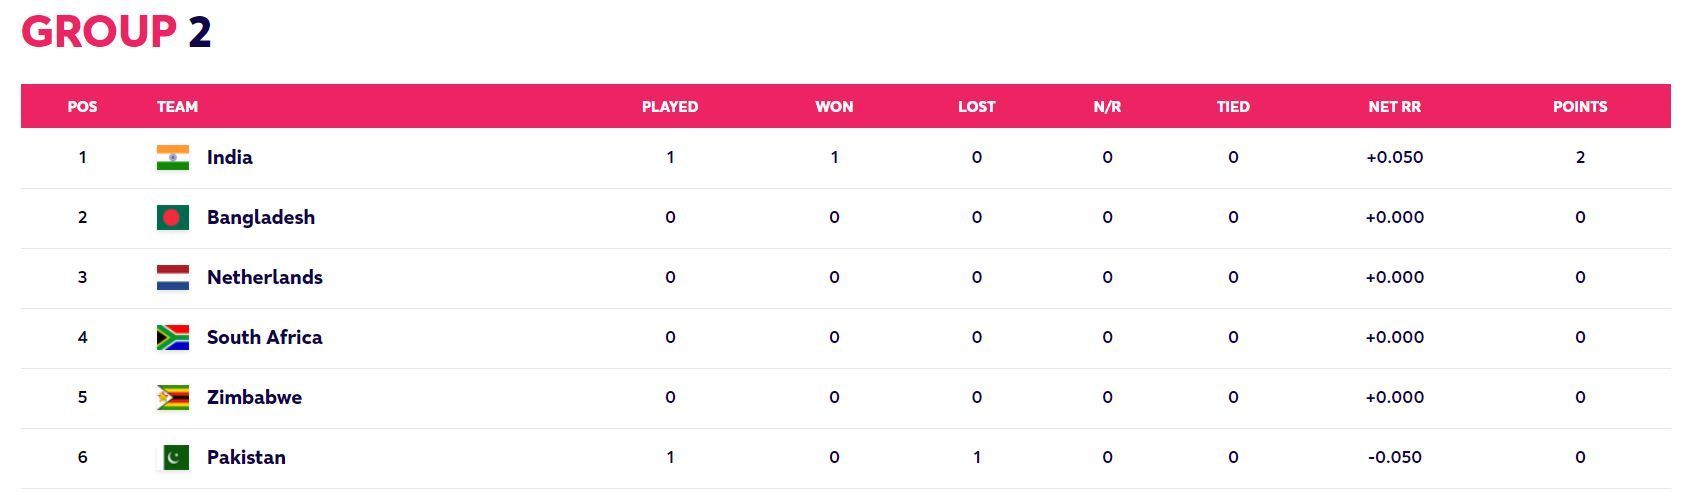 Updated Points Table after Match 16 (Image Courtesy: www.t20worldcup.com)